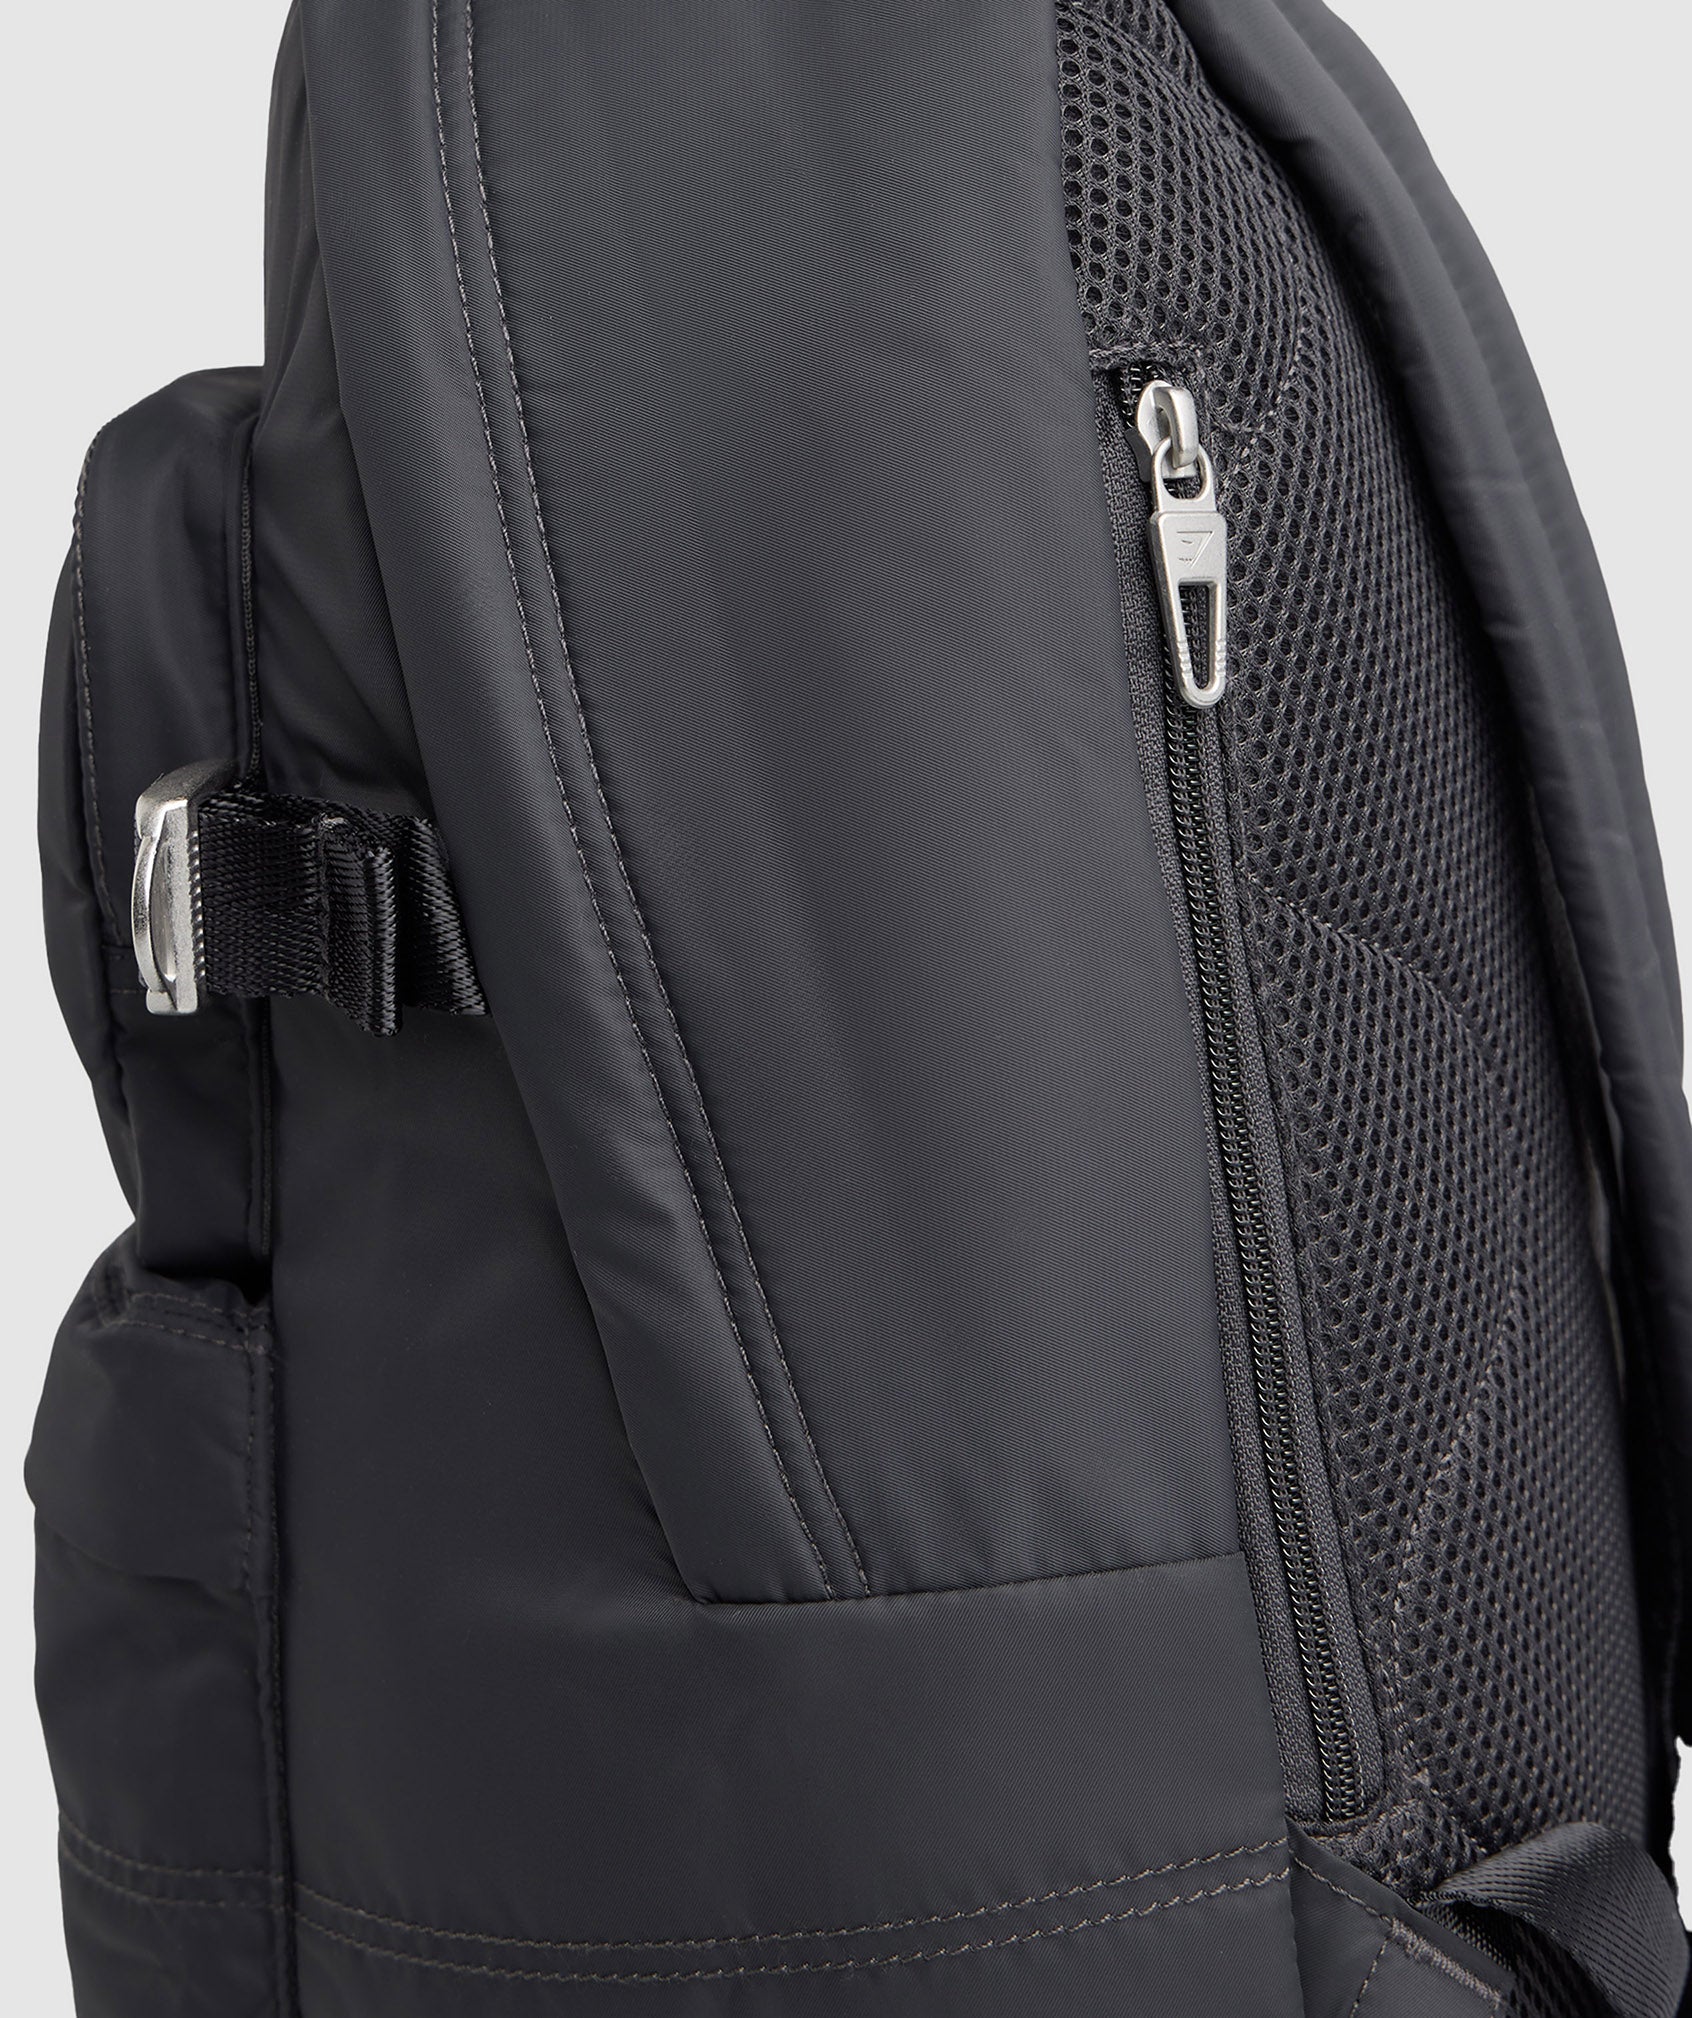 Premium Lifestyle Backpack in Onyx Grey - view 3